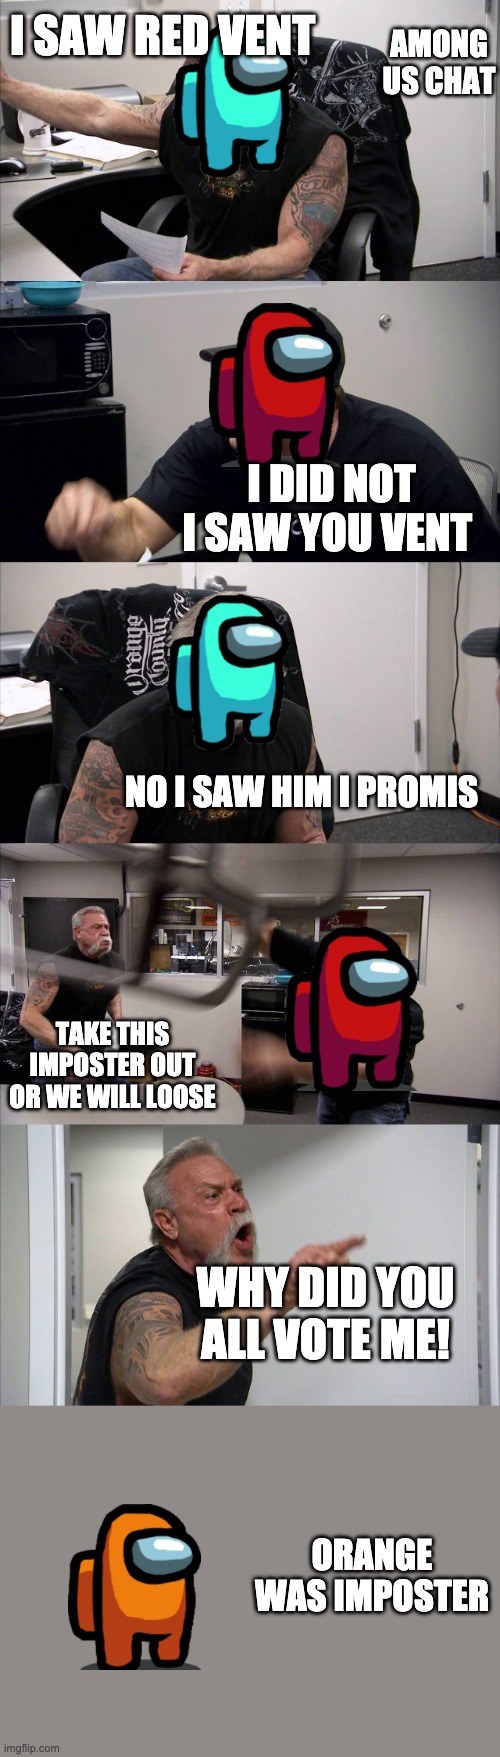 American Chopper Argument Meme | I SAW RED VENT; AMONG US CHAT; I DID NOT I SAW YOU VENT; NO I SAW HIM I PROMIS; TAKE THIS IMPOSTER OUT OR WE WILL LOOSE; WHY DID YOU ALL VOTE ME! ORANGE WAS IMPOSTER | image tagged in memes,american chopper argument | made w/ Imgflip meme maker